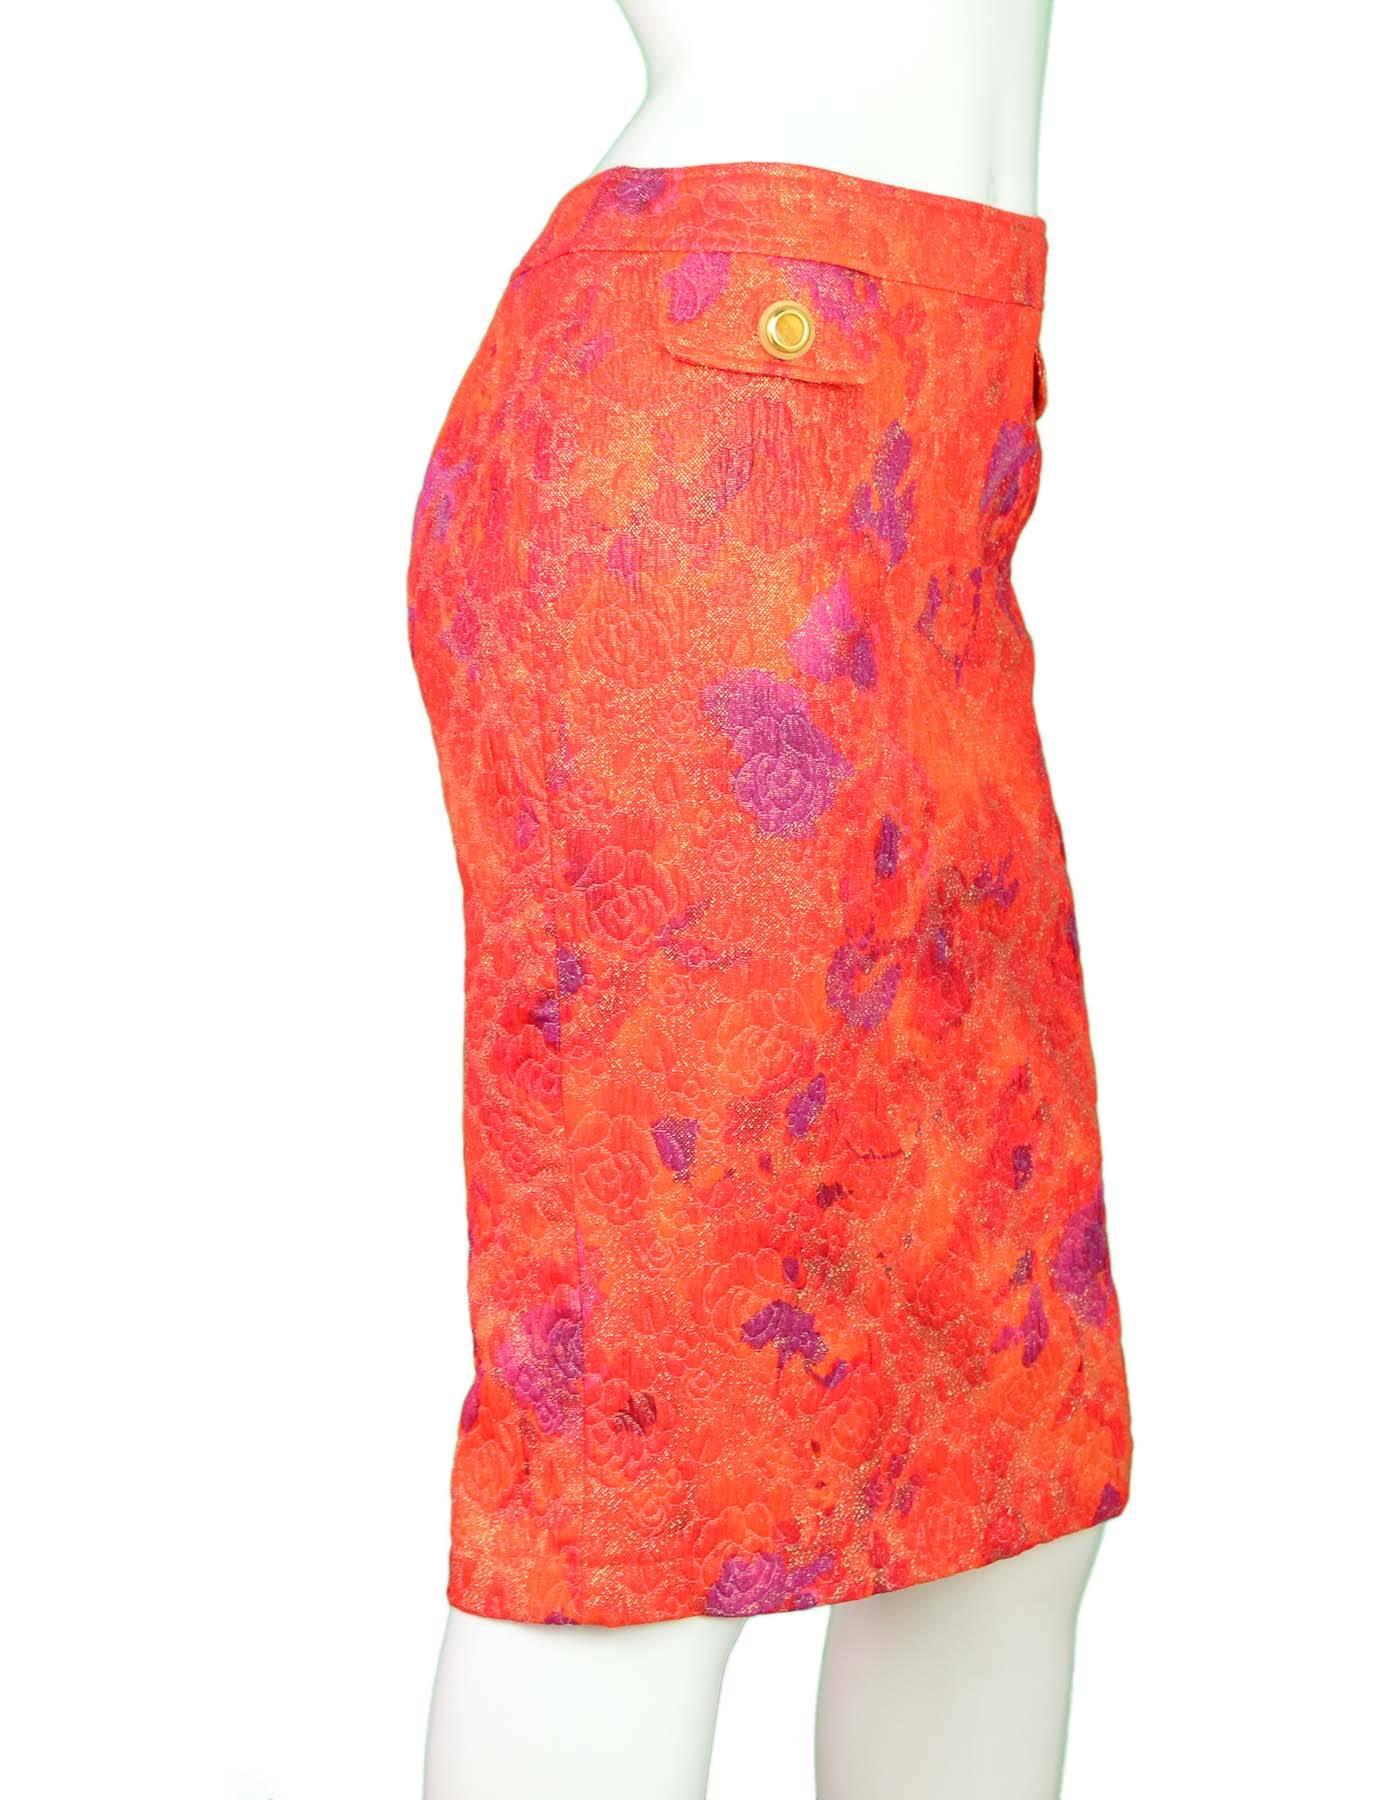 D&G Orange & Purple Brocade Skirt Sz 48

Features metallic threading throughout

Made In: Italy
Color: Orange, purple, gold
Composition: 74% cotton, 11% polyester, 11% rayon, 4% other fibers
Lining: Pink textile
Closure/Opening: